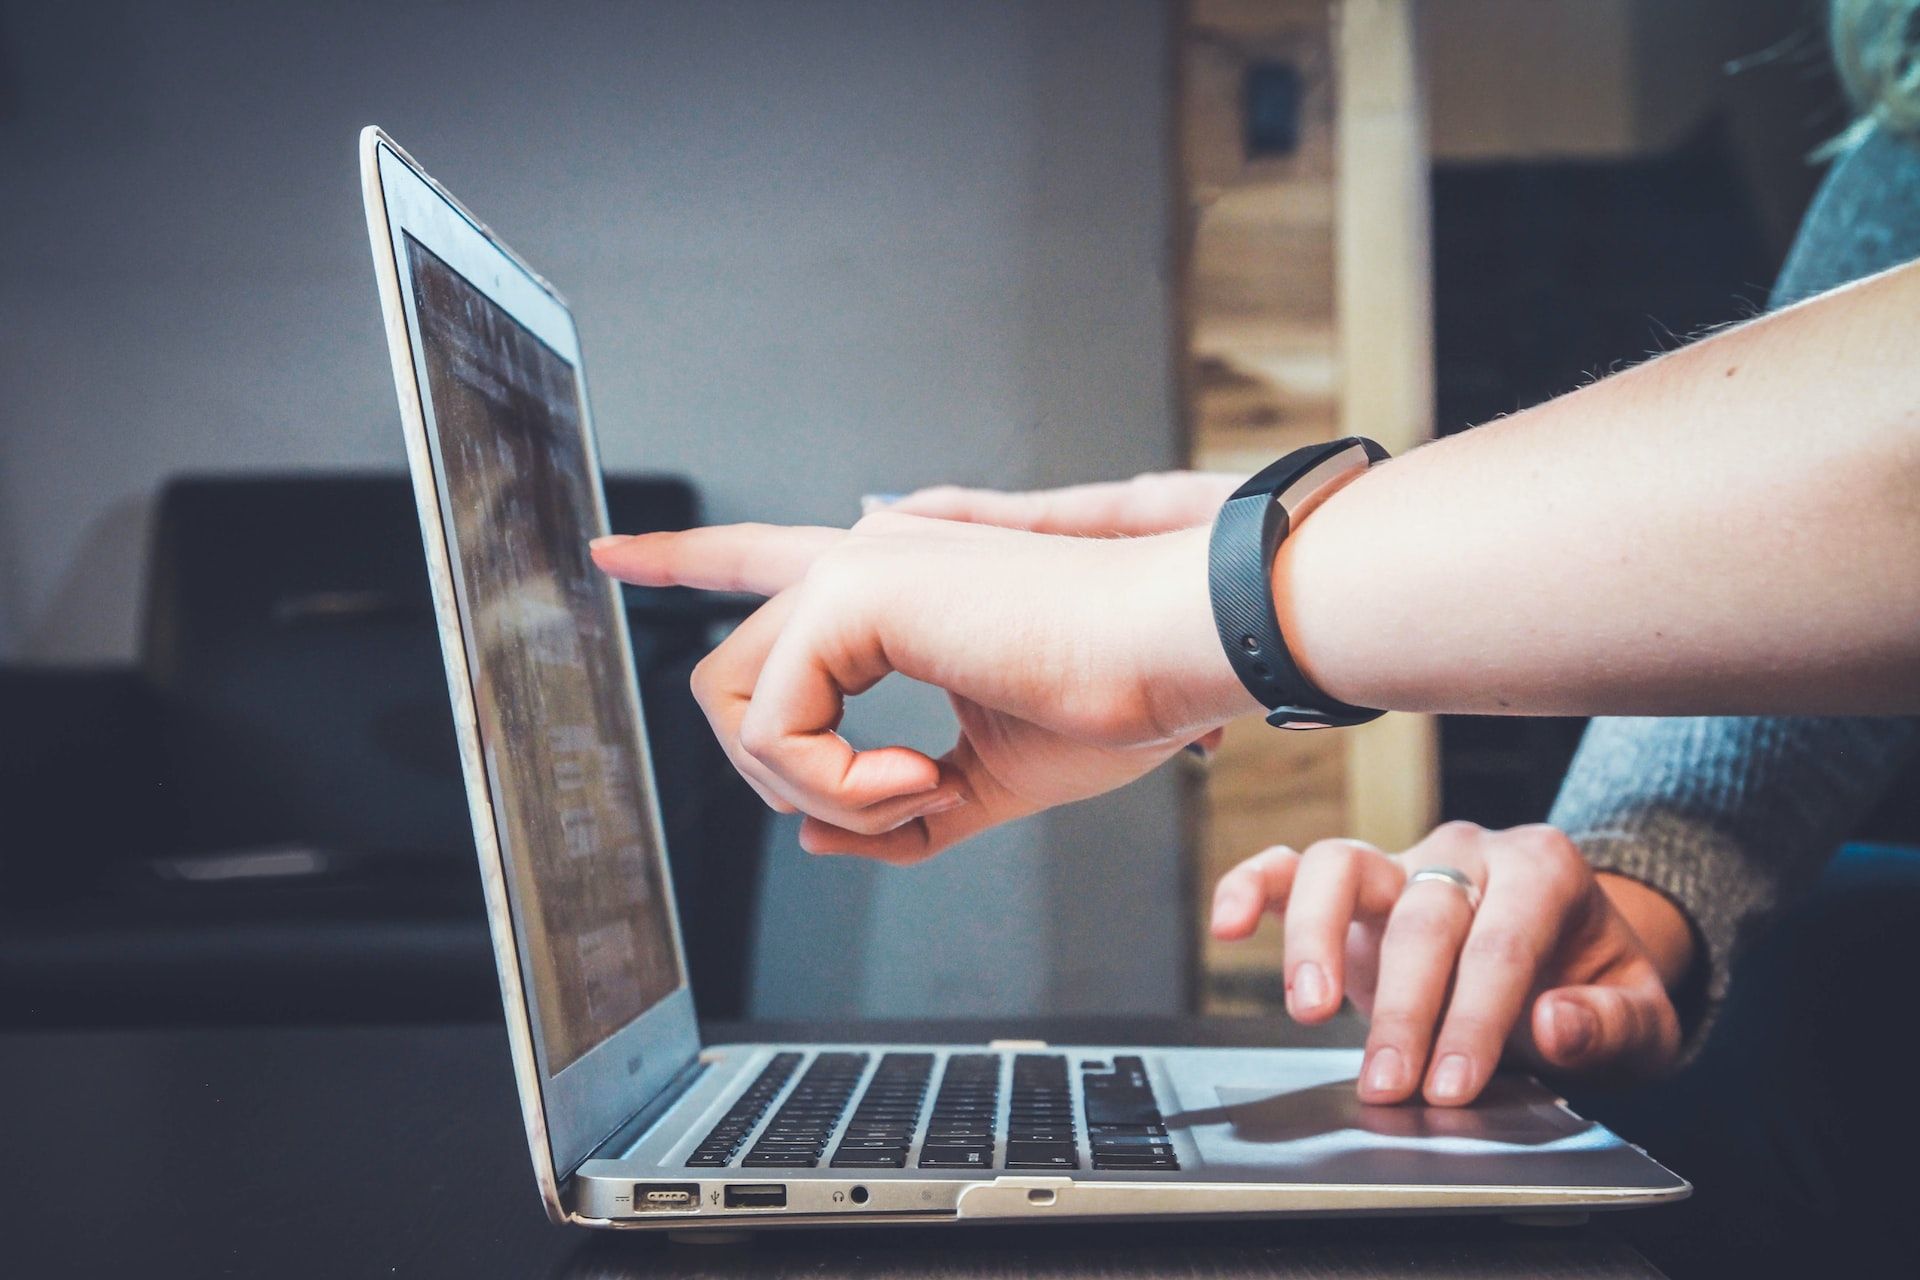 Image of a person wearing a Fitbit band pointing at a laptop